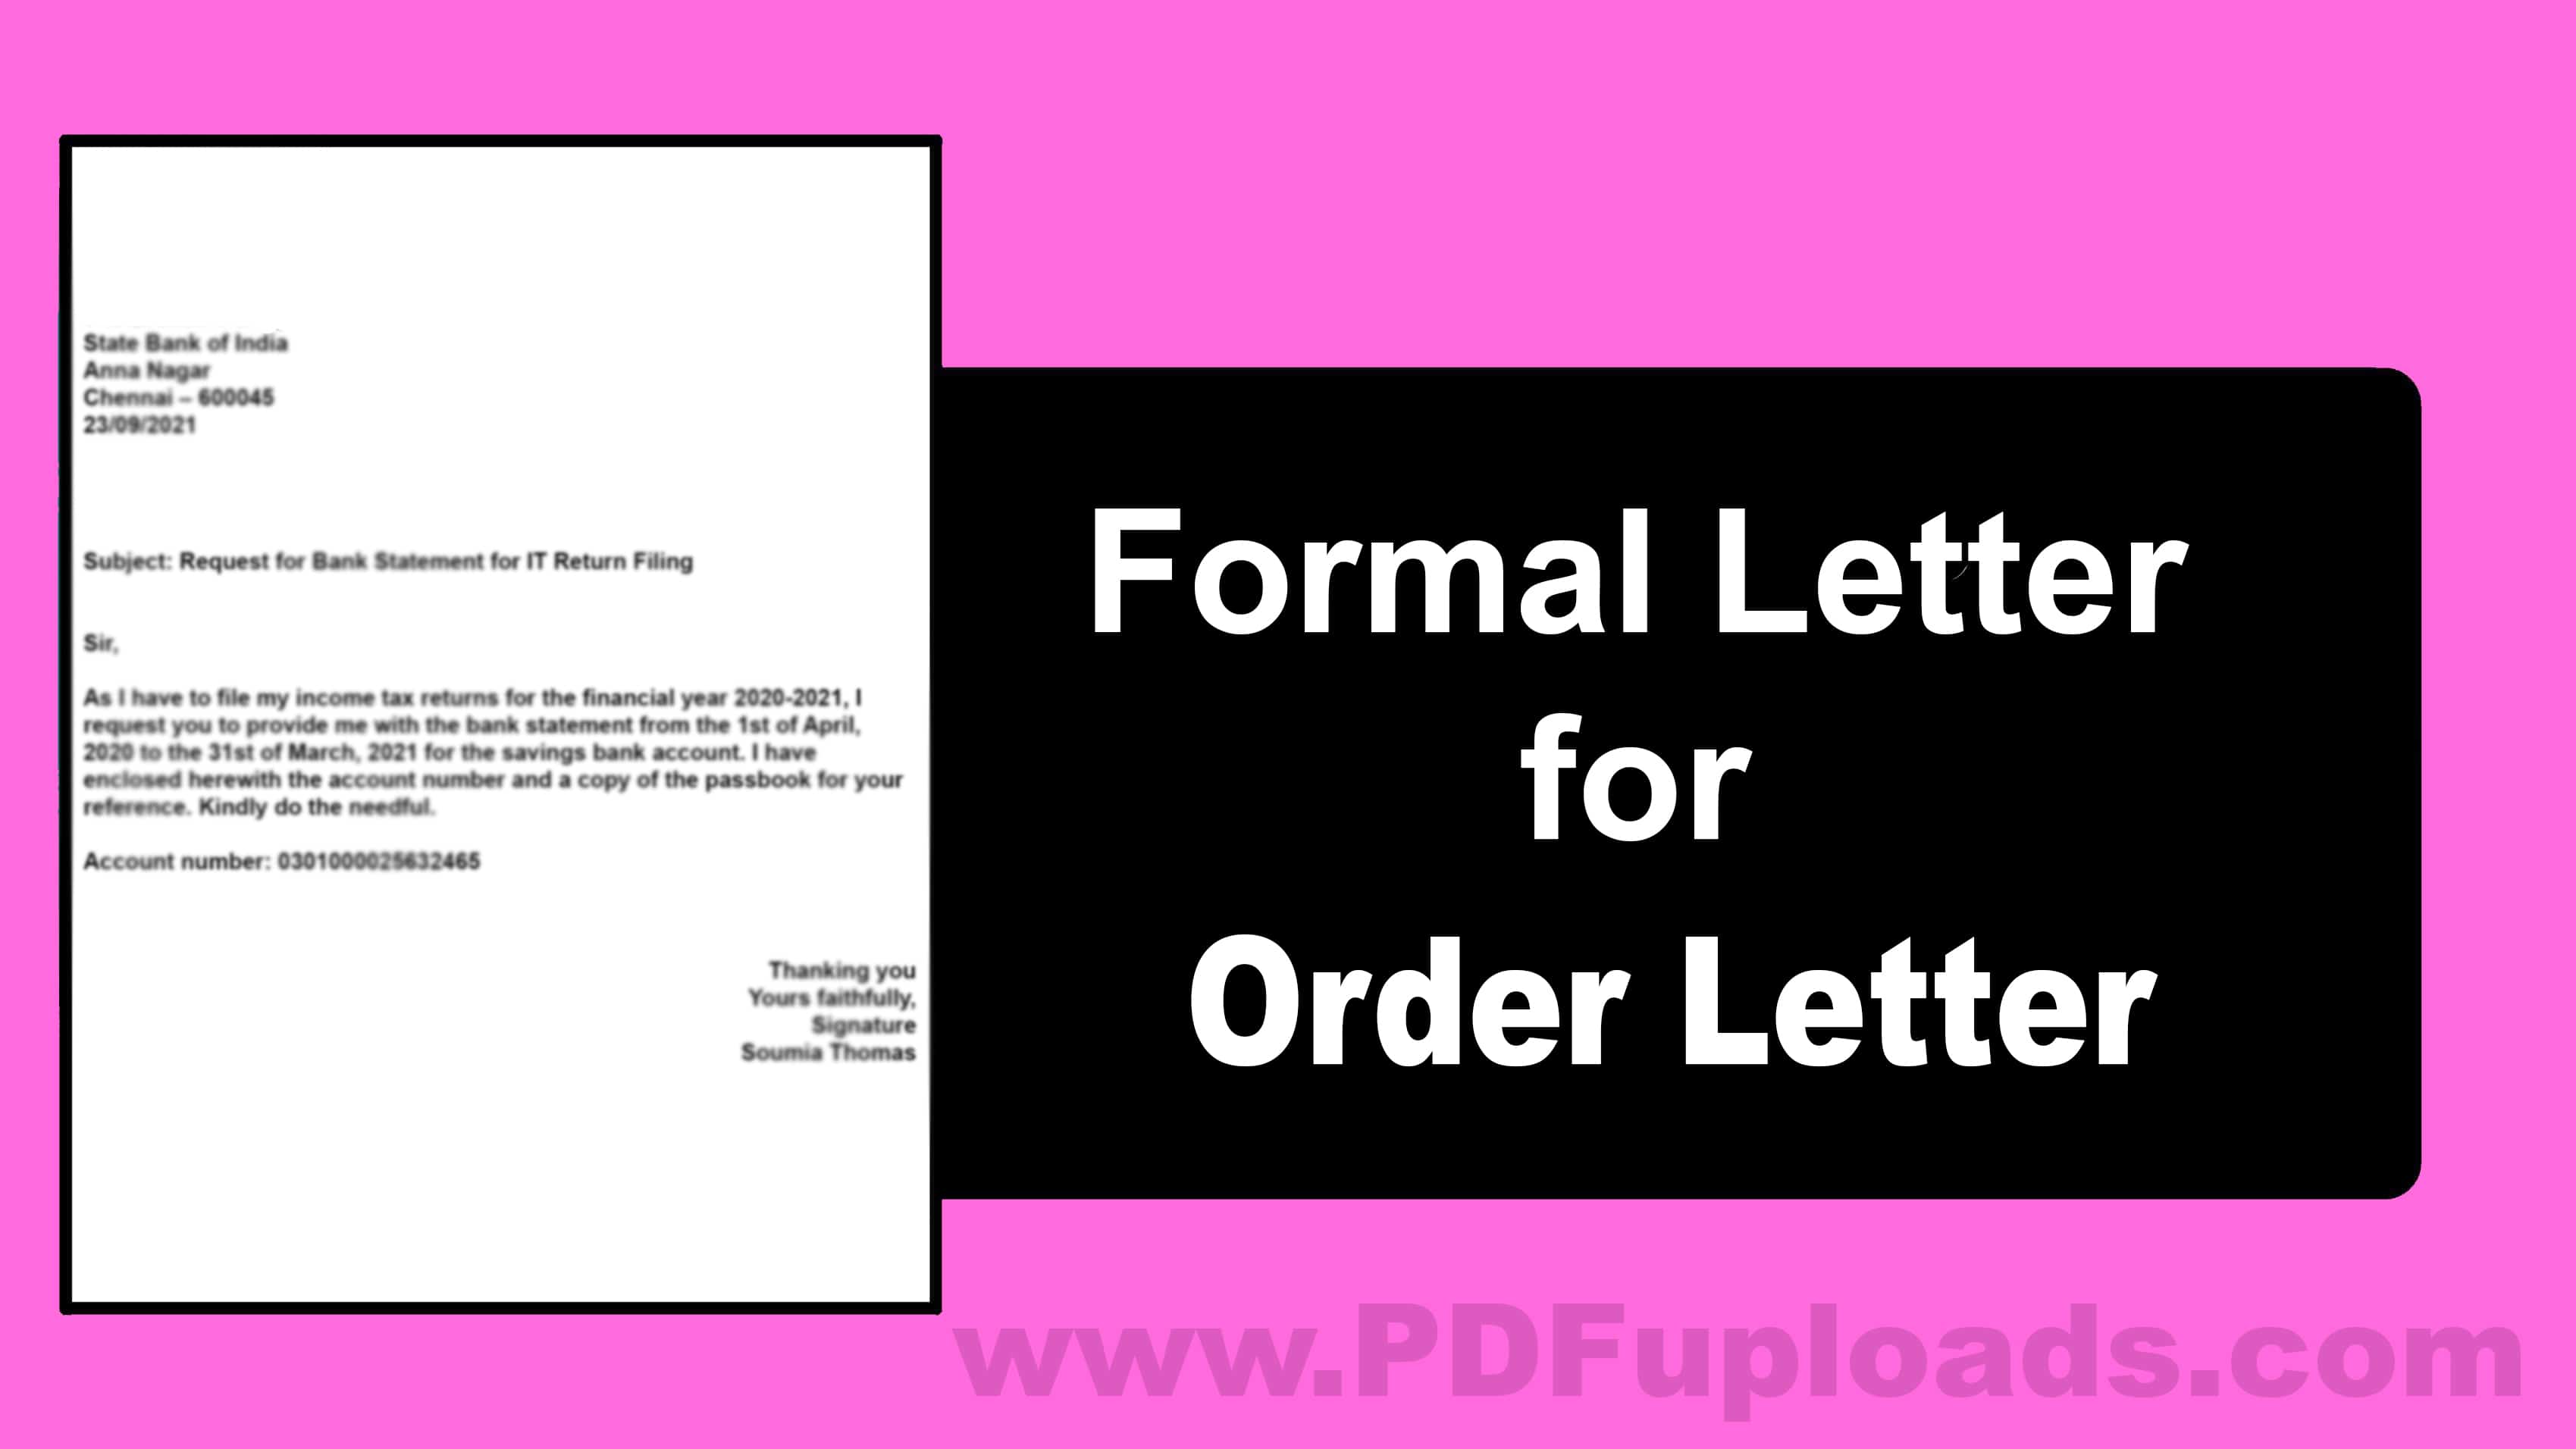 How to write Order Letter Formally